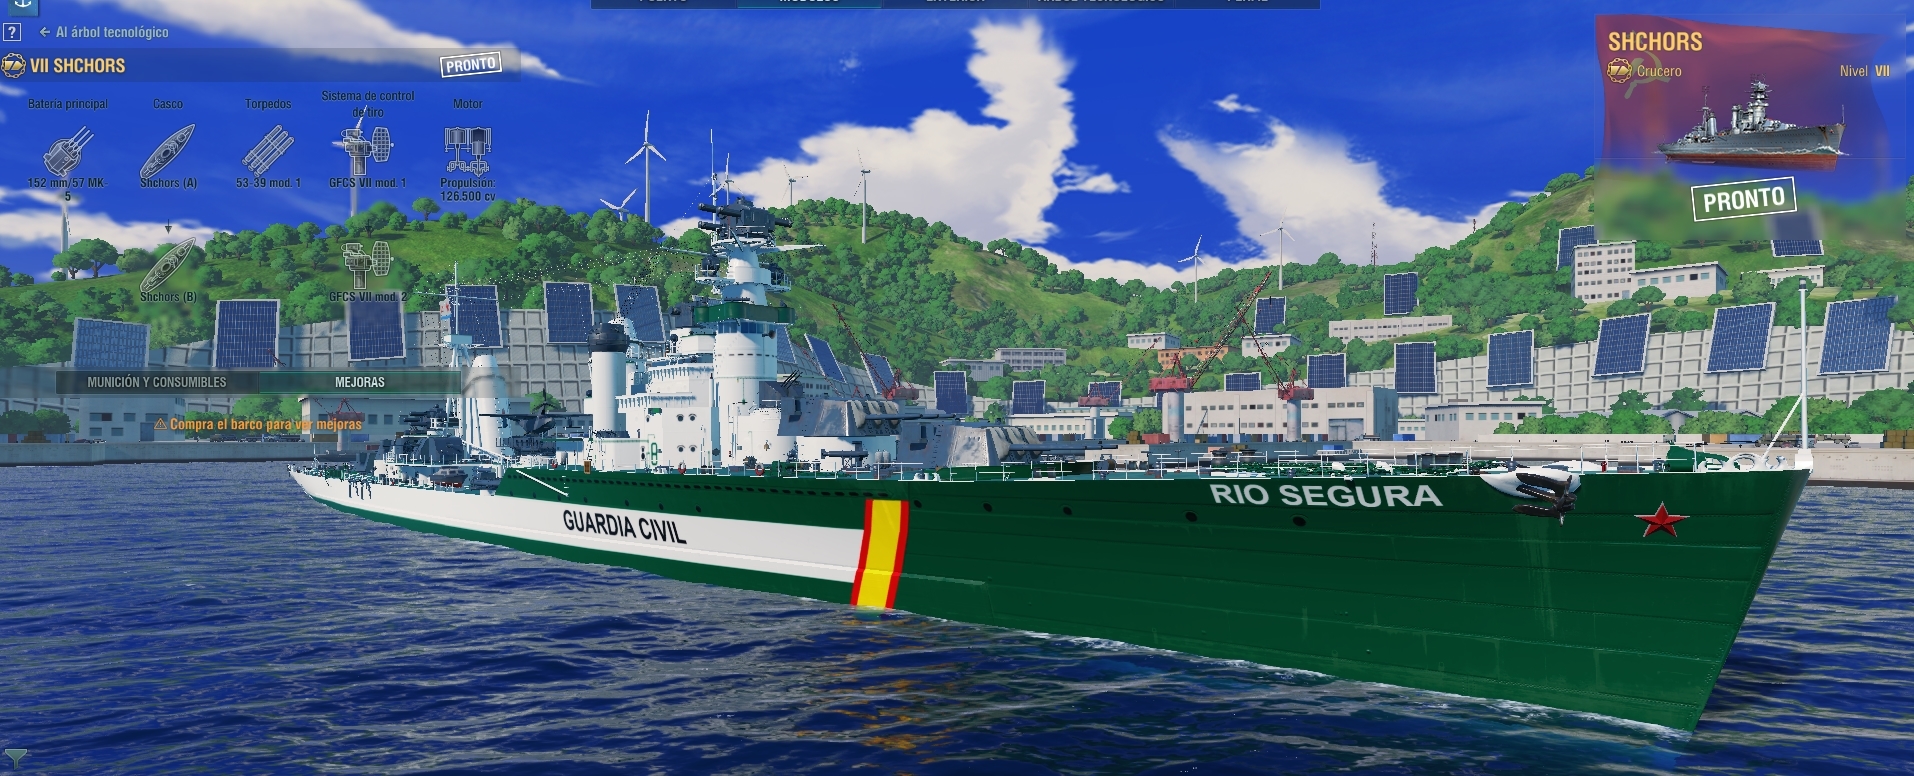 world of warships forum mods and addon